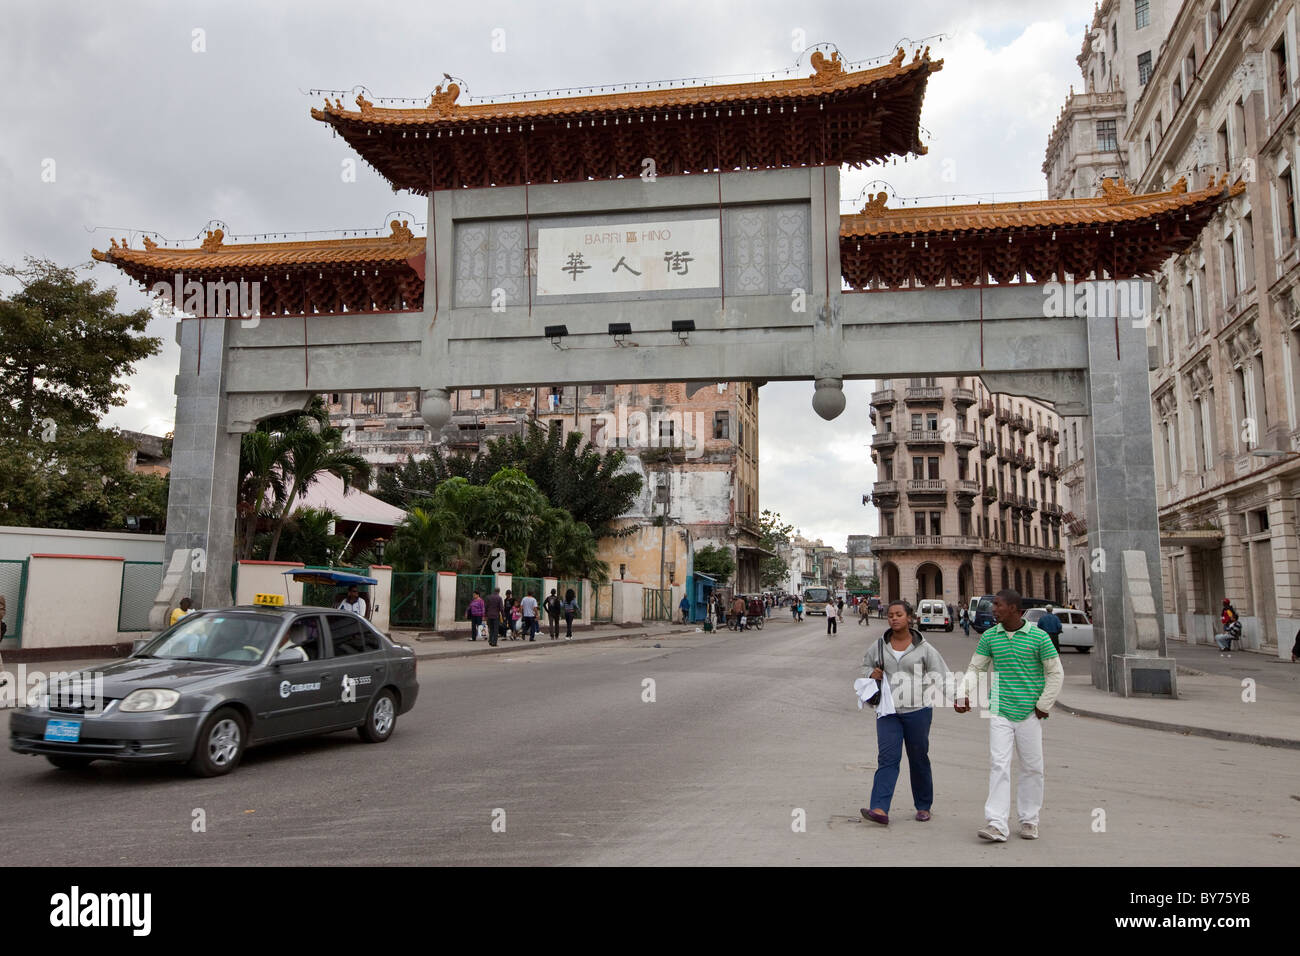 Cuba, Havana. Gate Marking Entrance to China Town. Gift of the Republic of China. Stock Photo